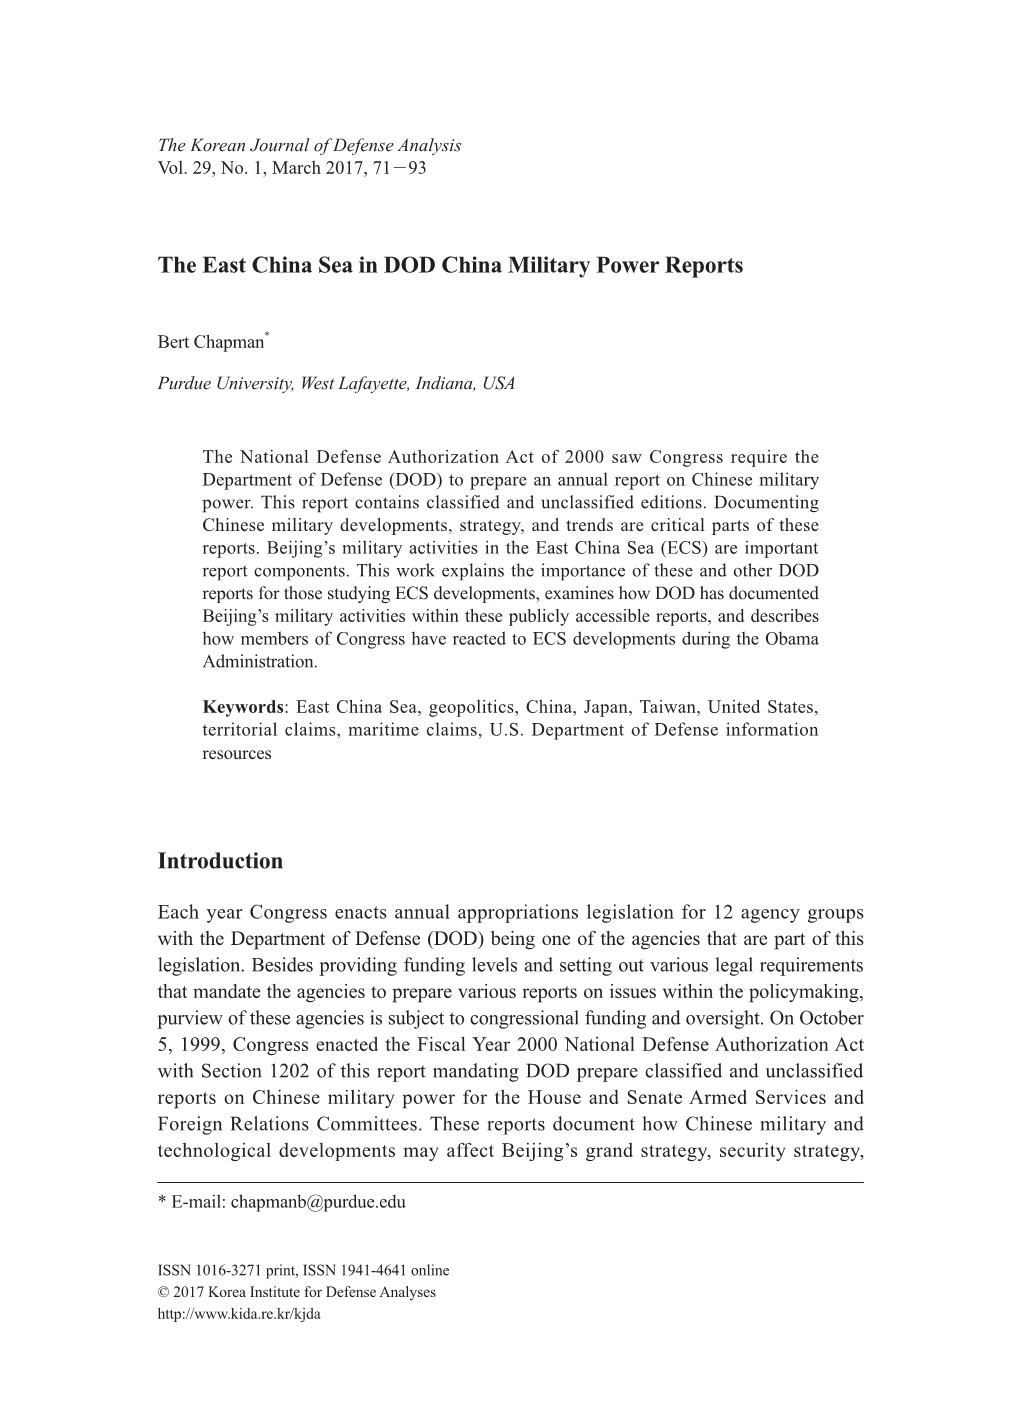 The East China Sea in DOD China Military Power Reports